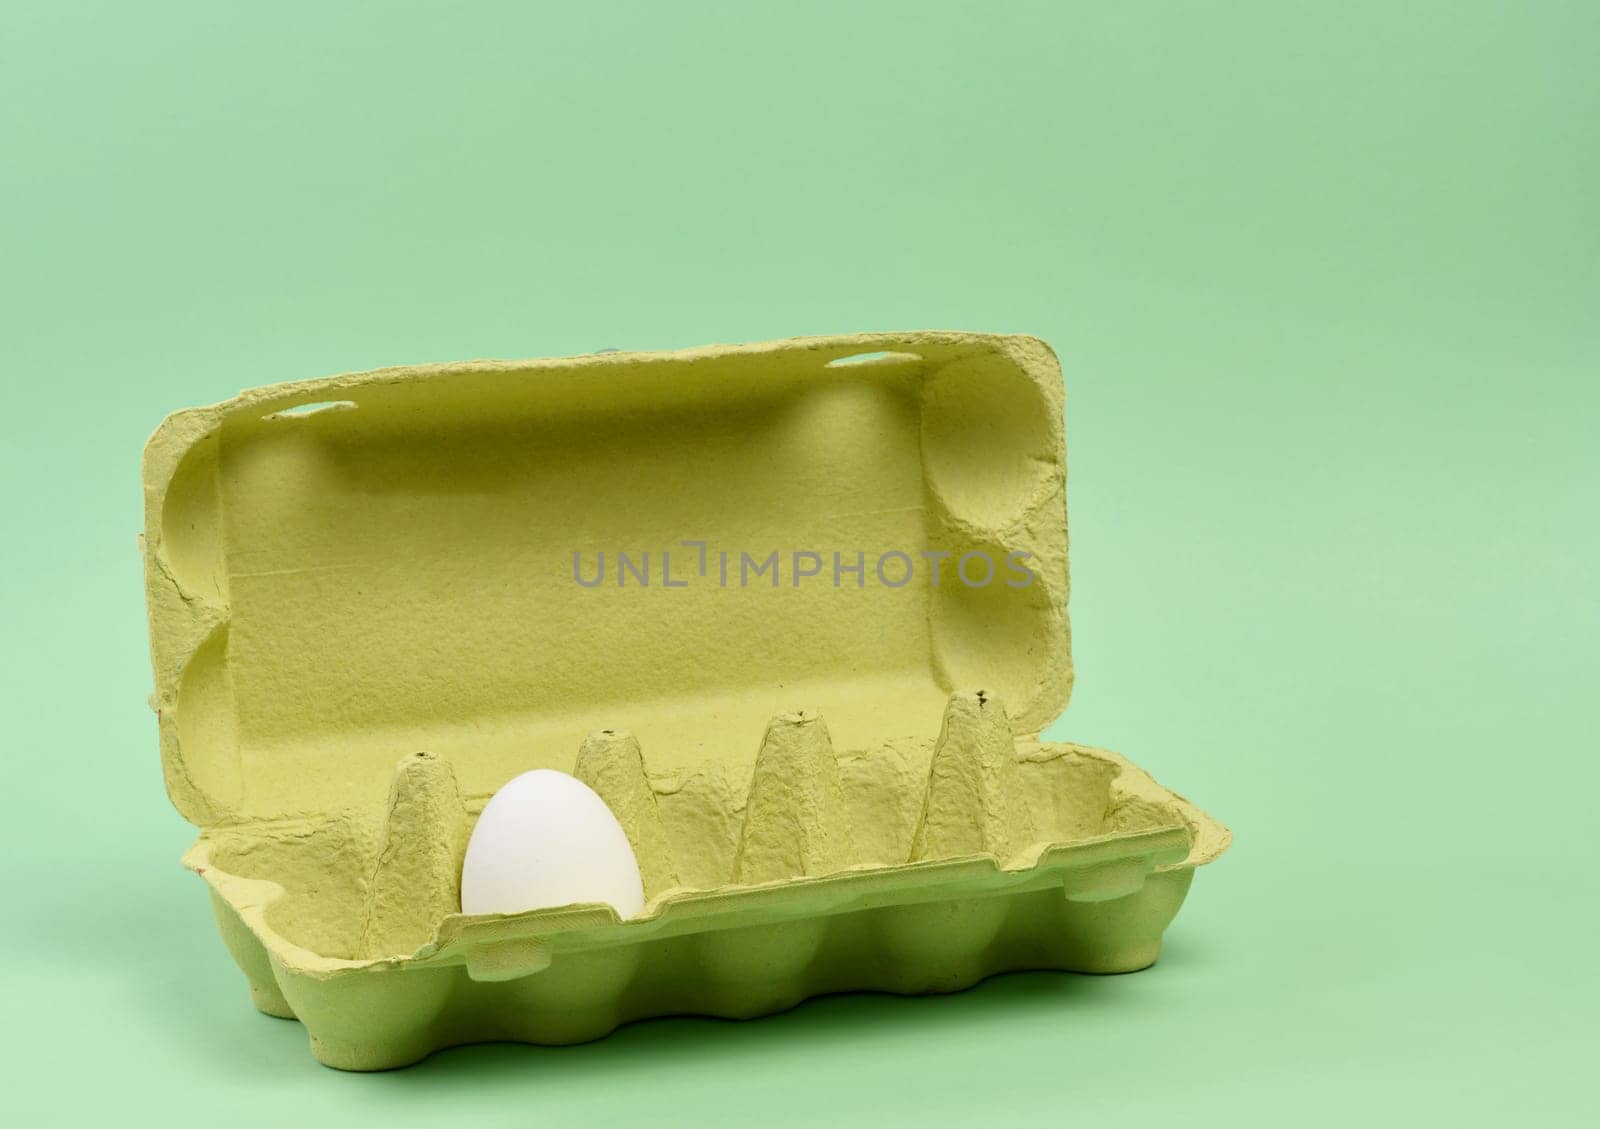 One white egg in a paper box on a green background by ndanko